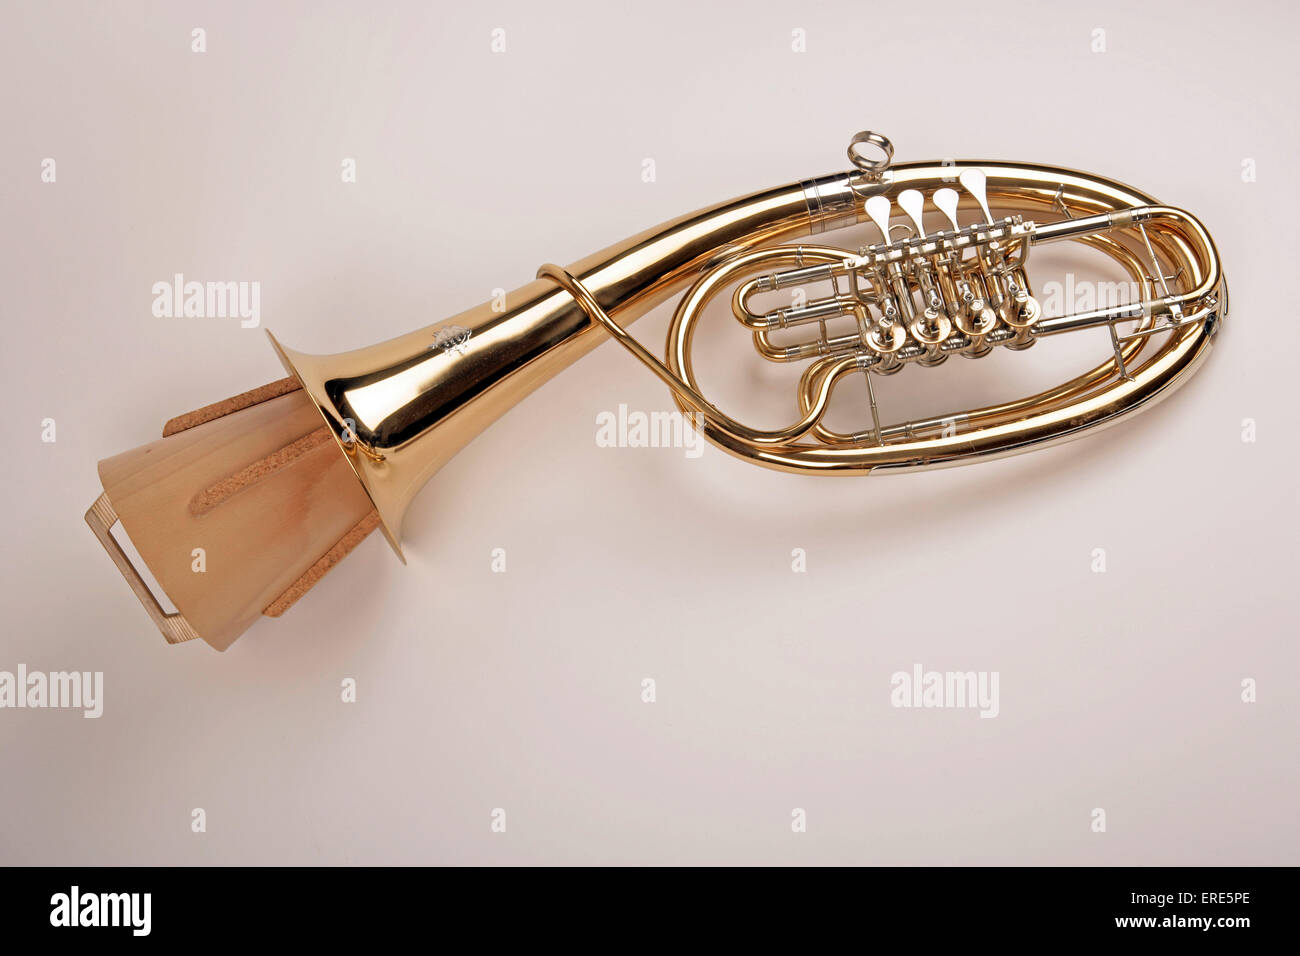 Wagner tuba with a mute in place. Brass instrument developed by Wagner for his Ring cycle. Waldhorntuba. Ringtuba Stock Photo